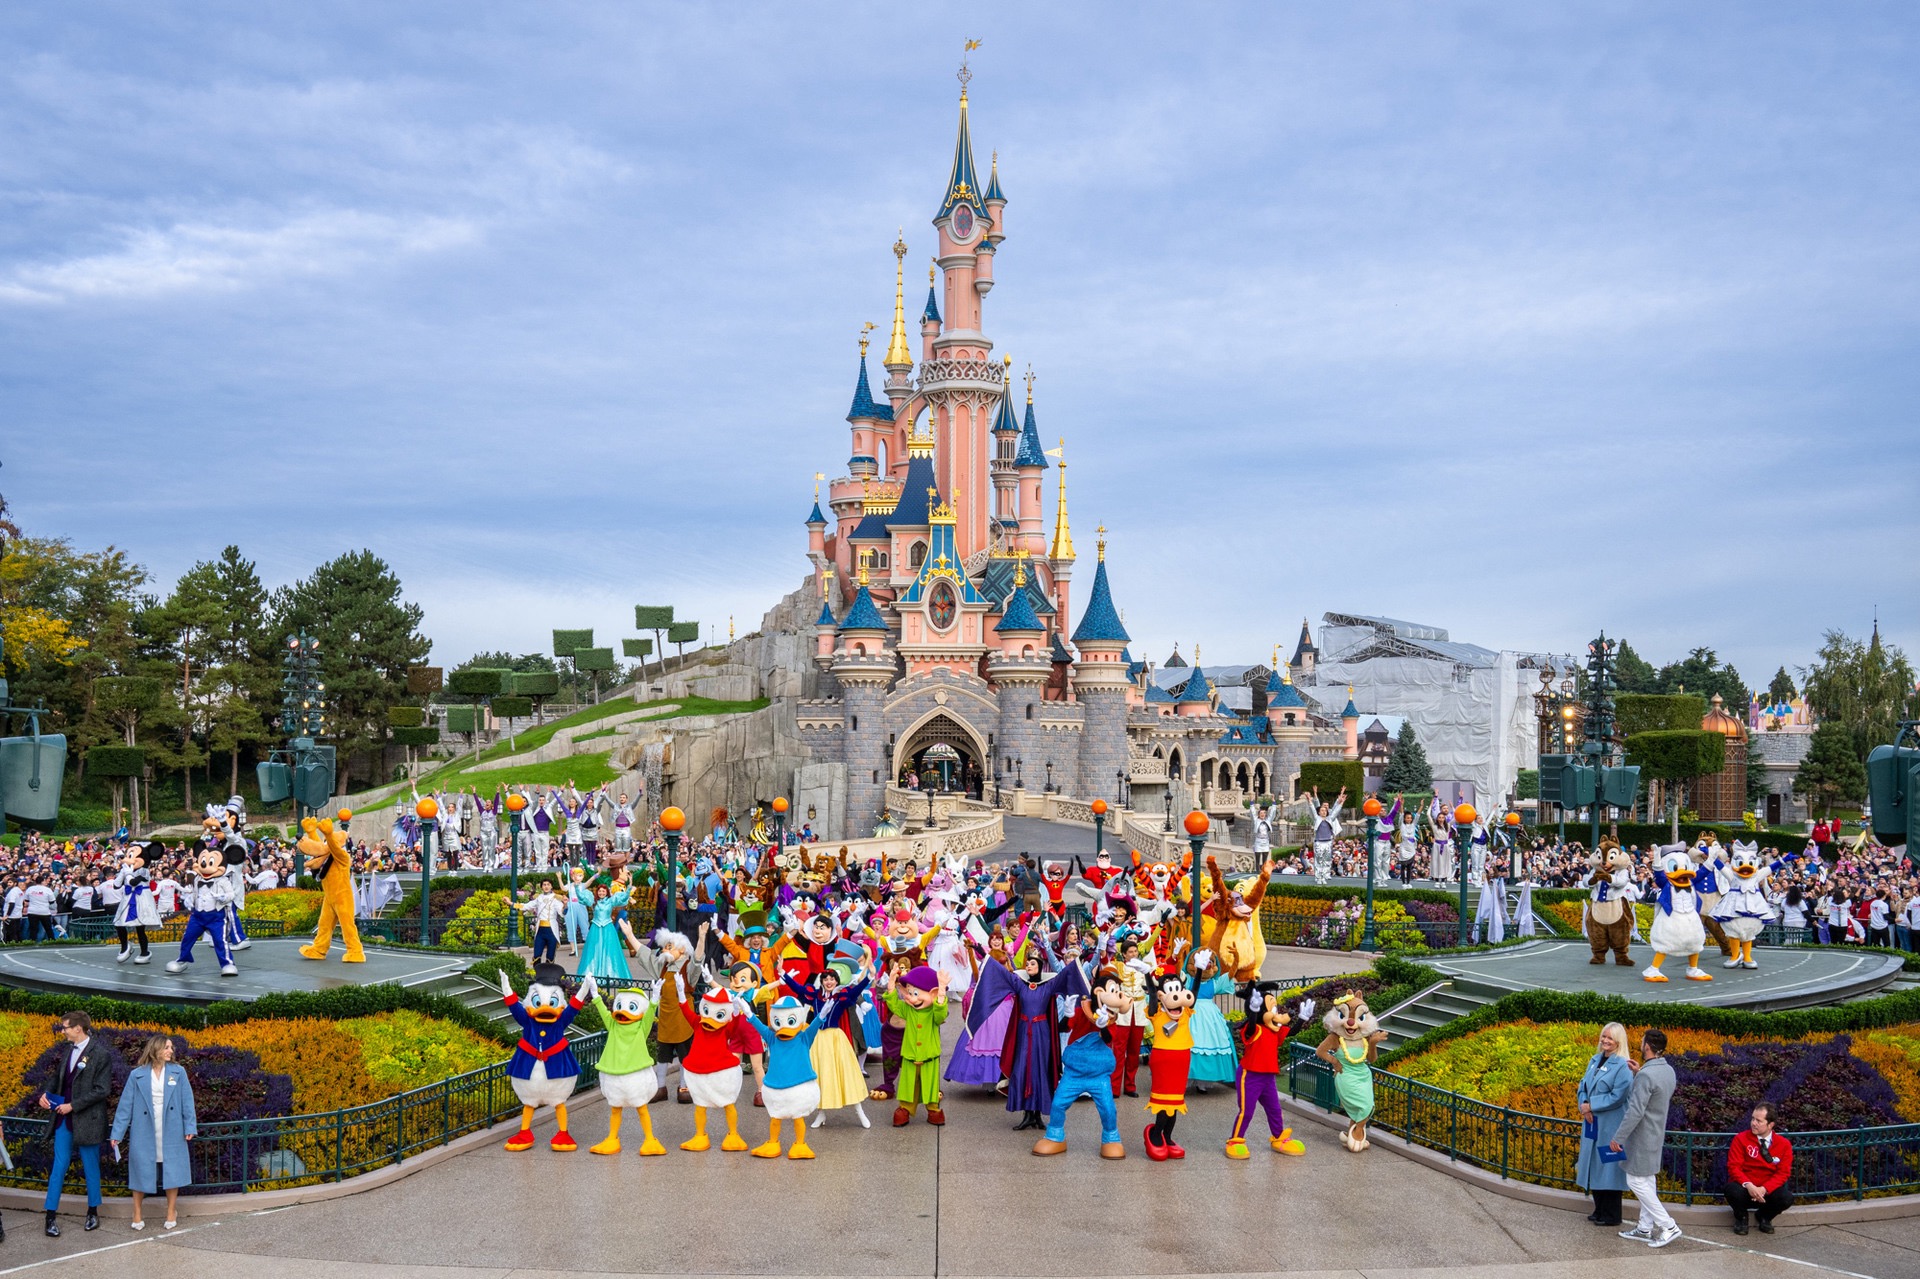 Disneyland Paris Celebrates Disney’s 100th Anniversary, 100 Characters, D100 InsidEars Photo and more!